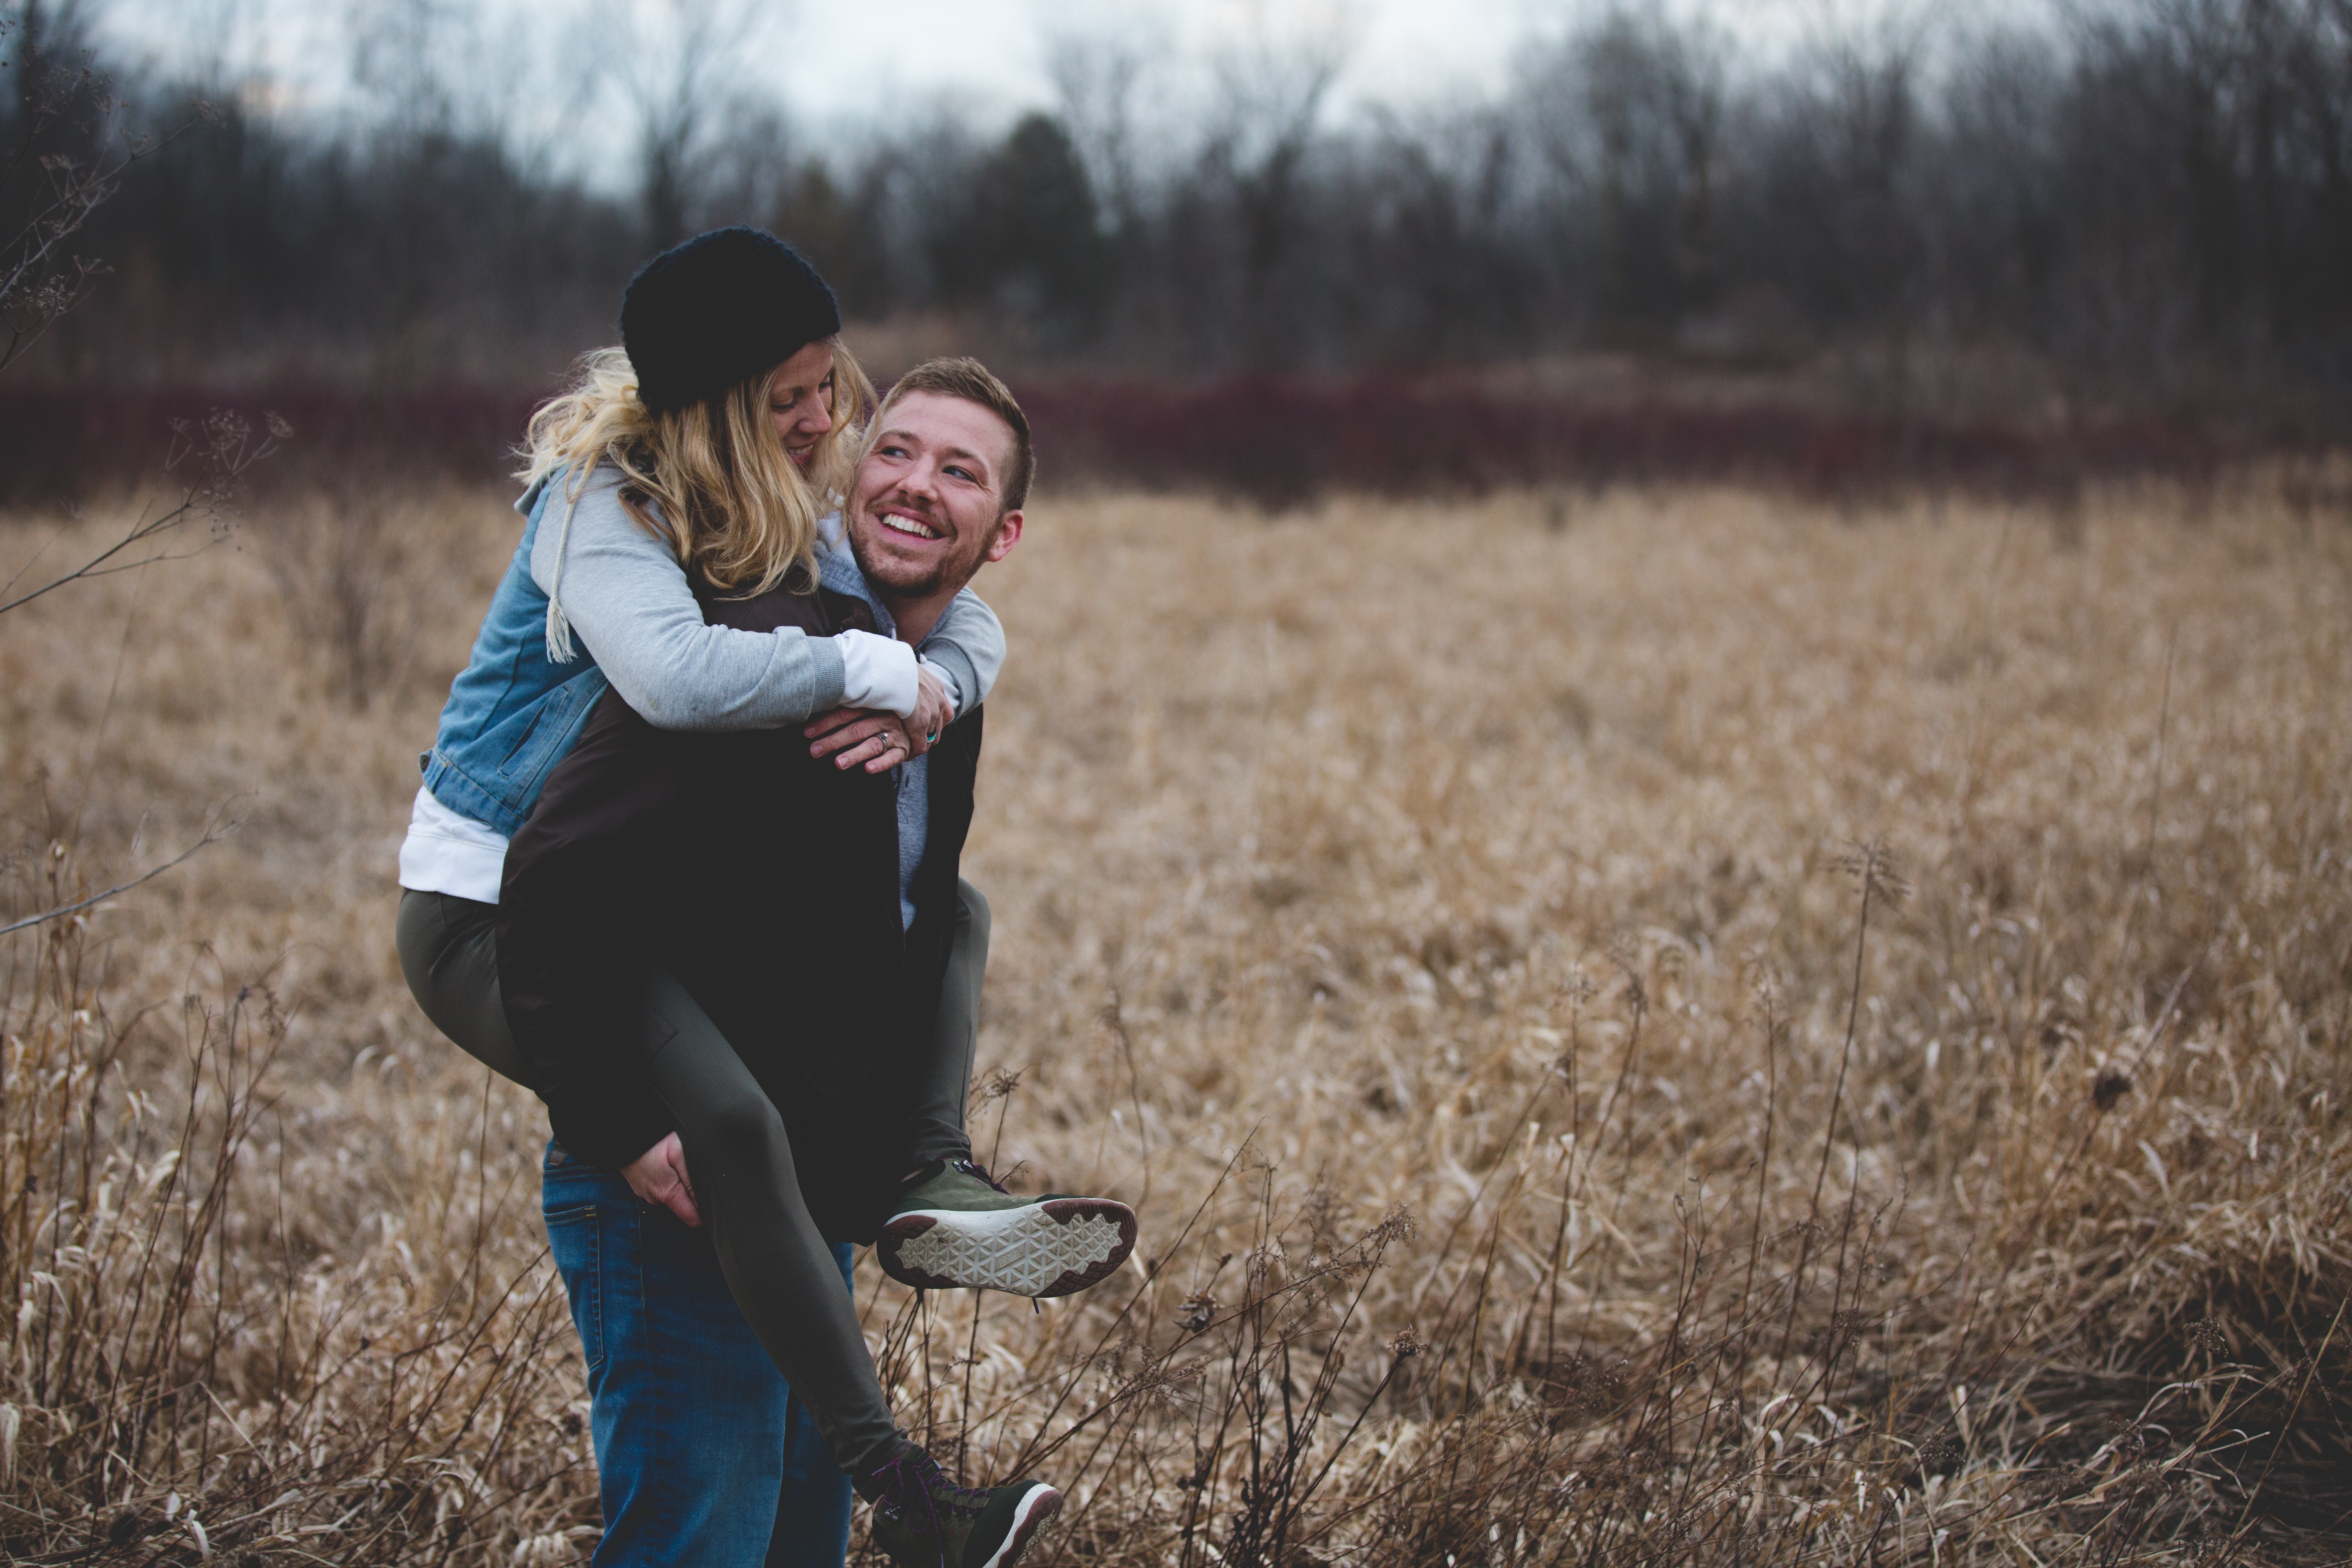 Photo of a Man Carrying His Partner, Adult, Outdoors, Joy, Laugh, HQ Photo